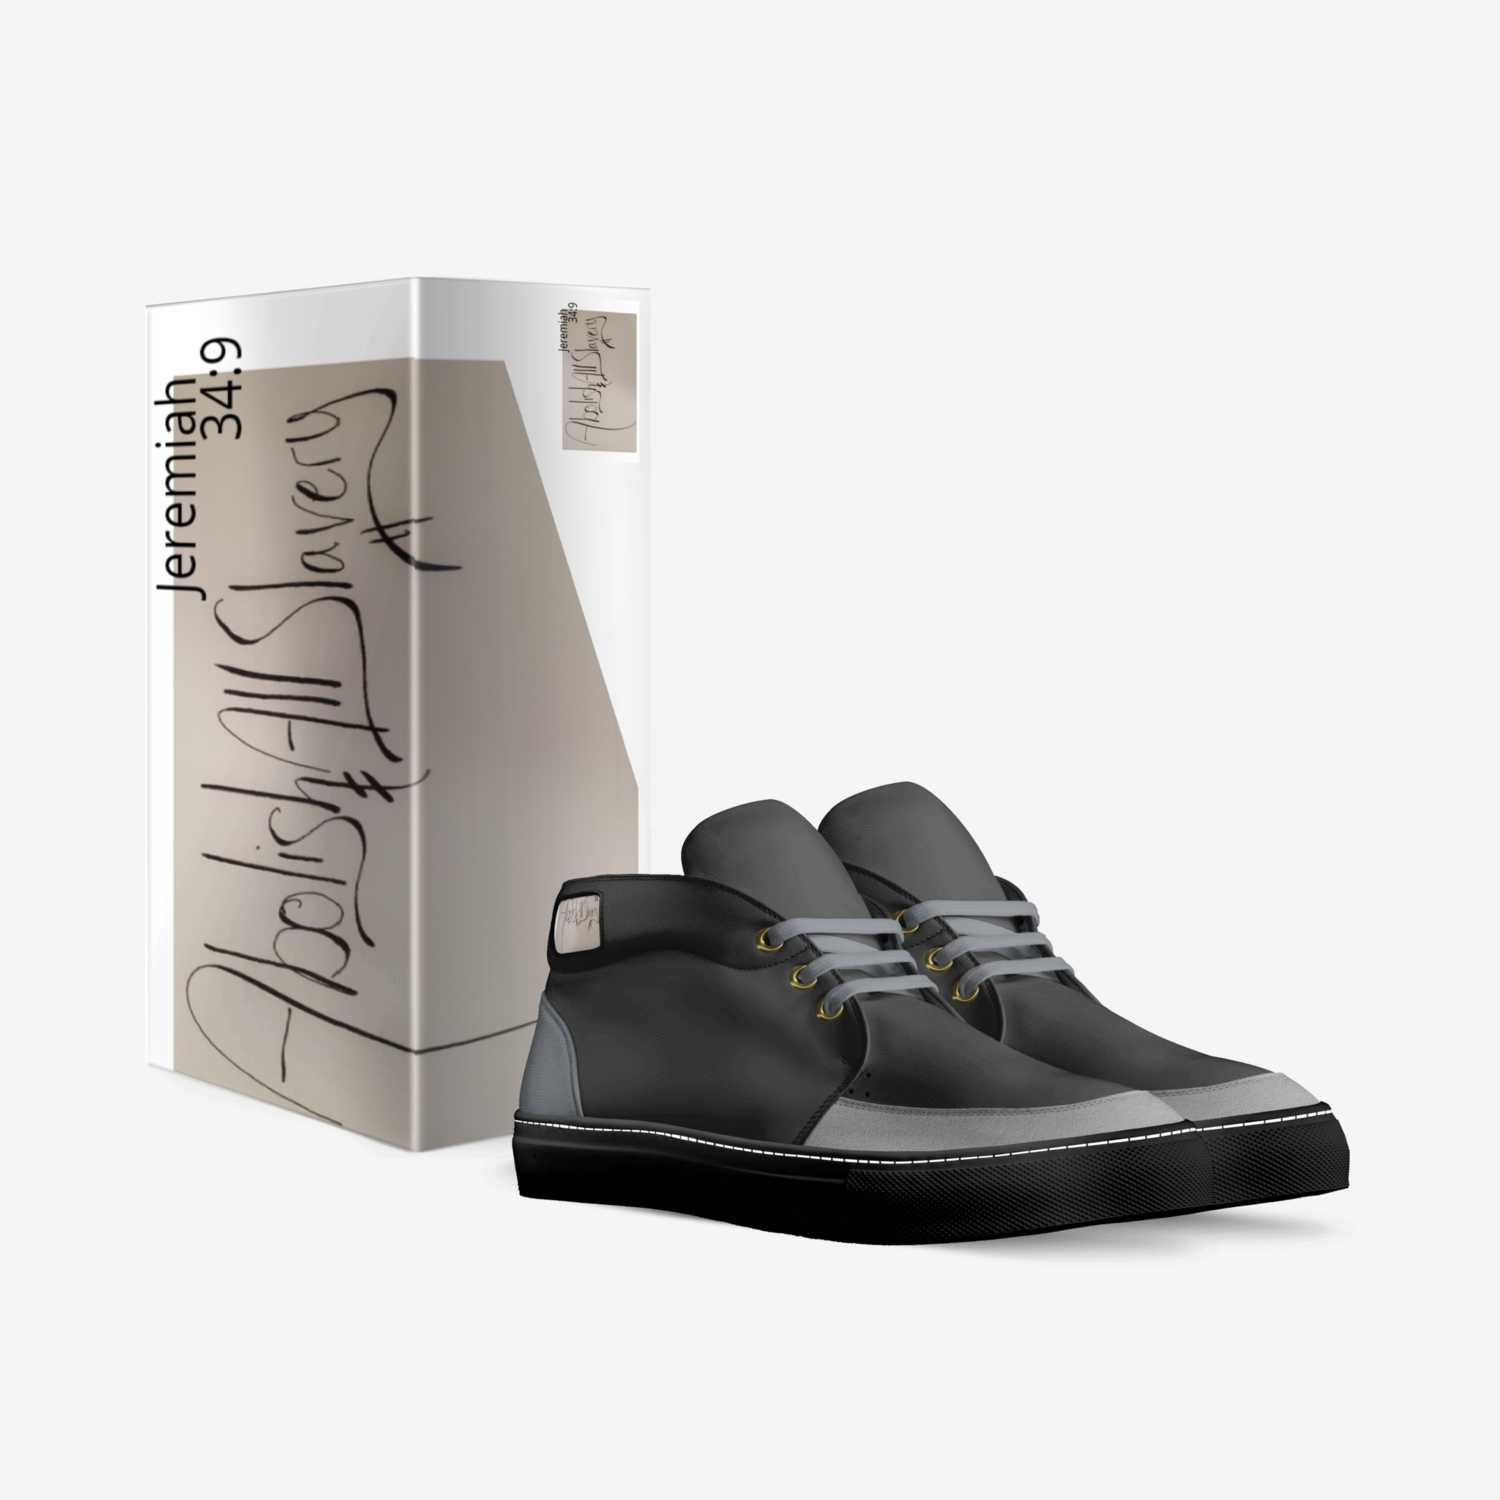 The Abolitionist custom made in Italy shoes by S.t.i.l. Bright | Box view